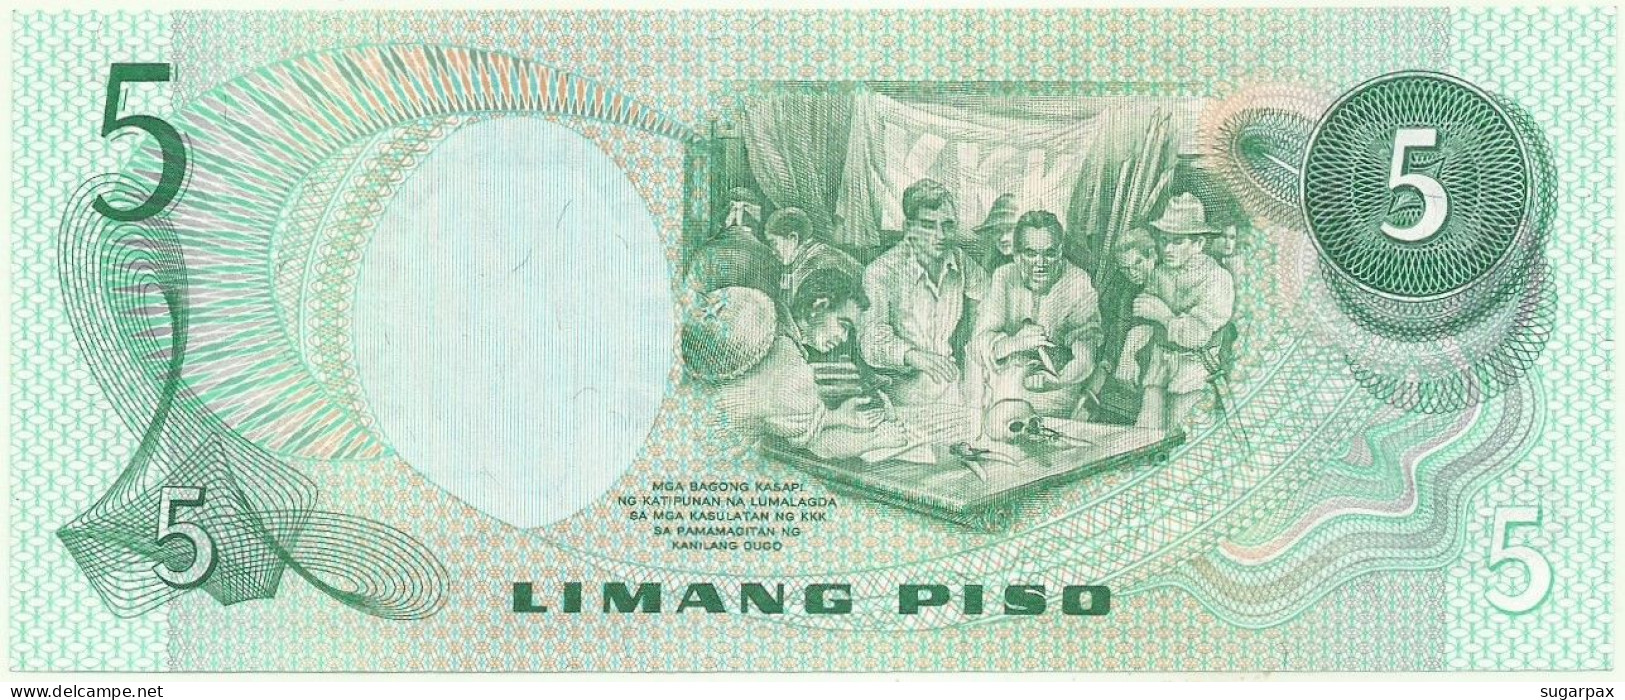 Philippines - 5 Piso - ND ( 1978 ) - Pick 160.d - Unc. - Sign. 10 - Red Serial # PF - ANG BAGONG LIPUNAN - Philippines